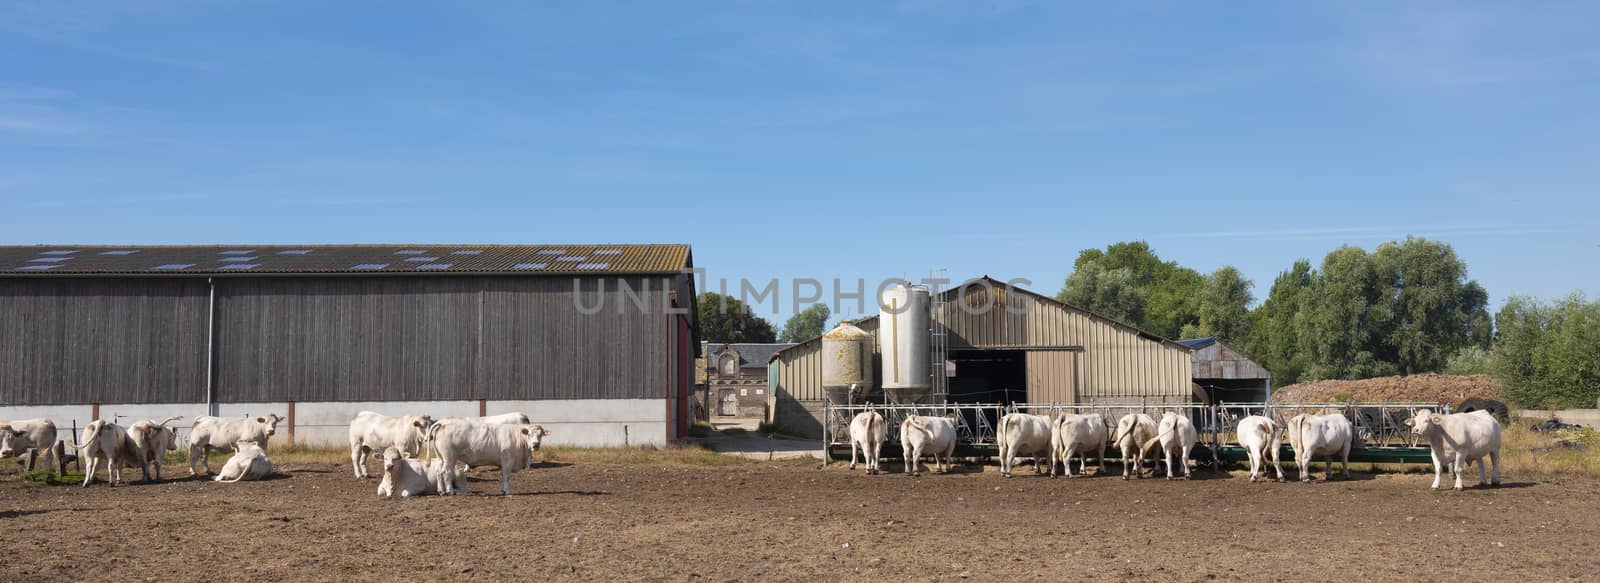 white cows and old farm near boulogne in french normandy by ahavelaar